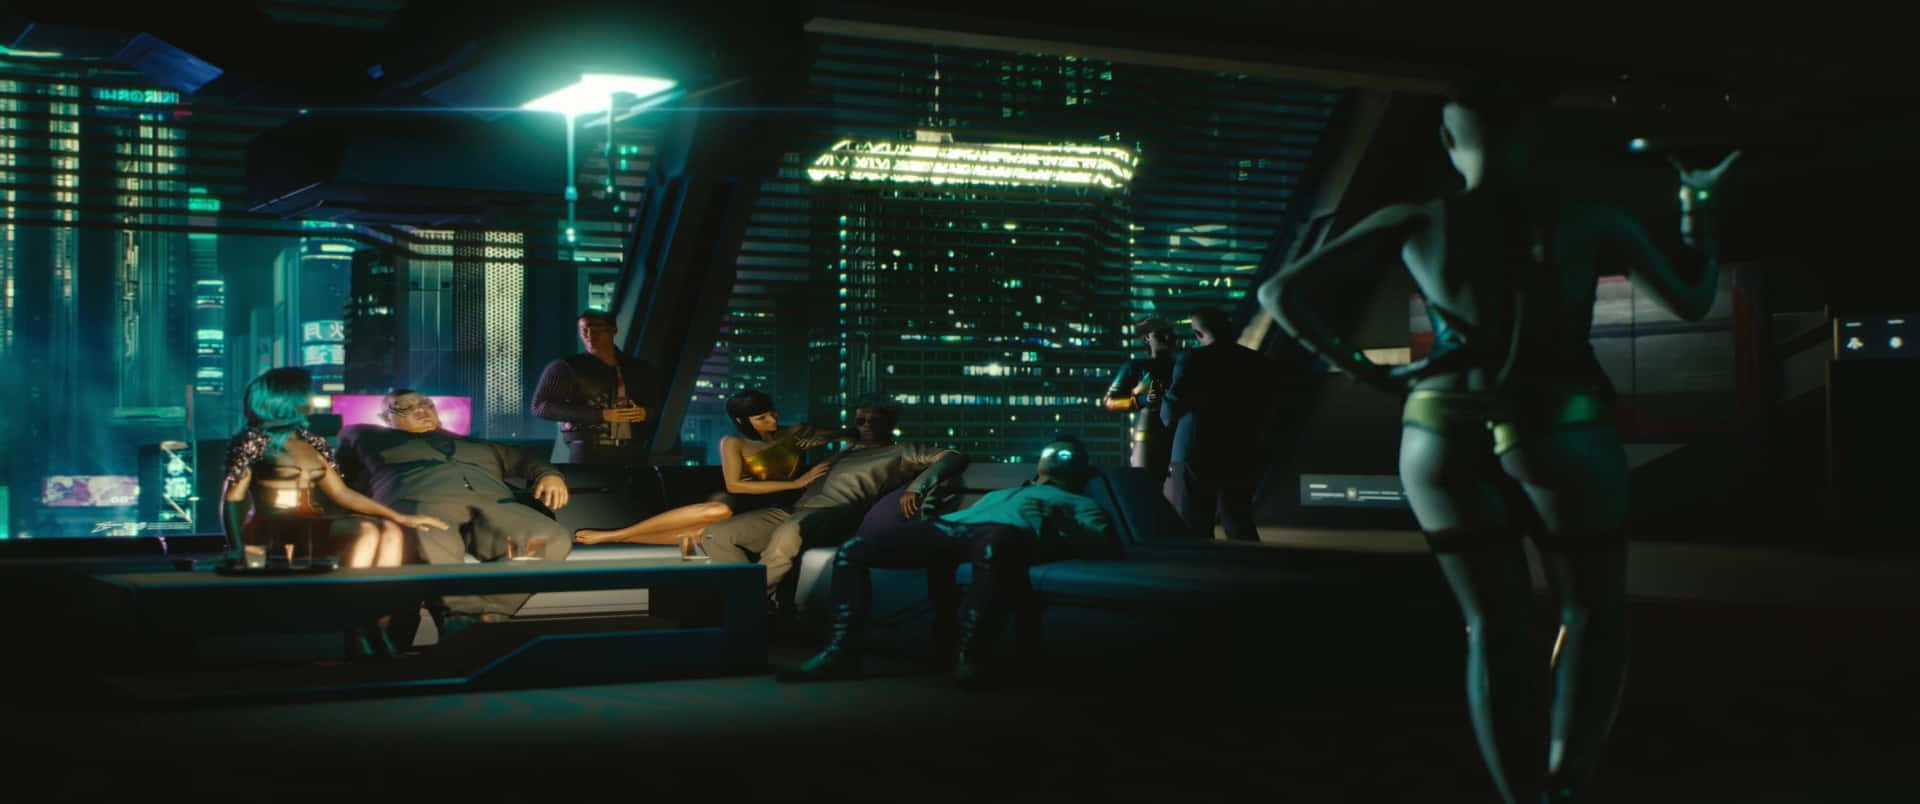 3440x1440p Cyberpunk 2077 Background Gangsters And Girls Hanging Out